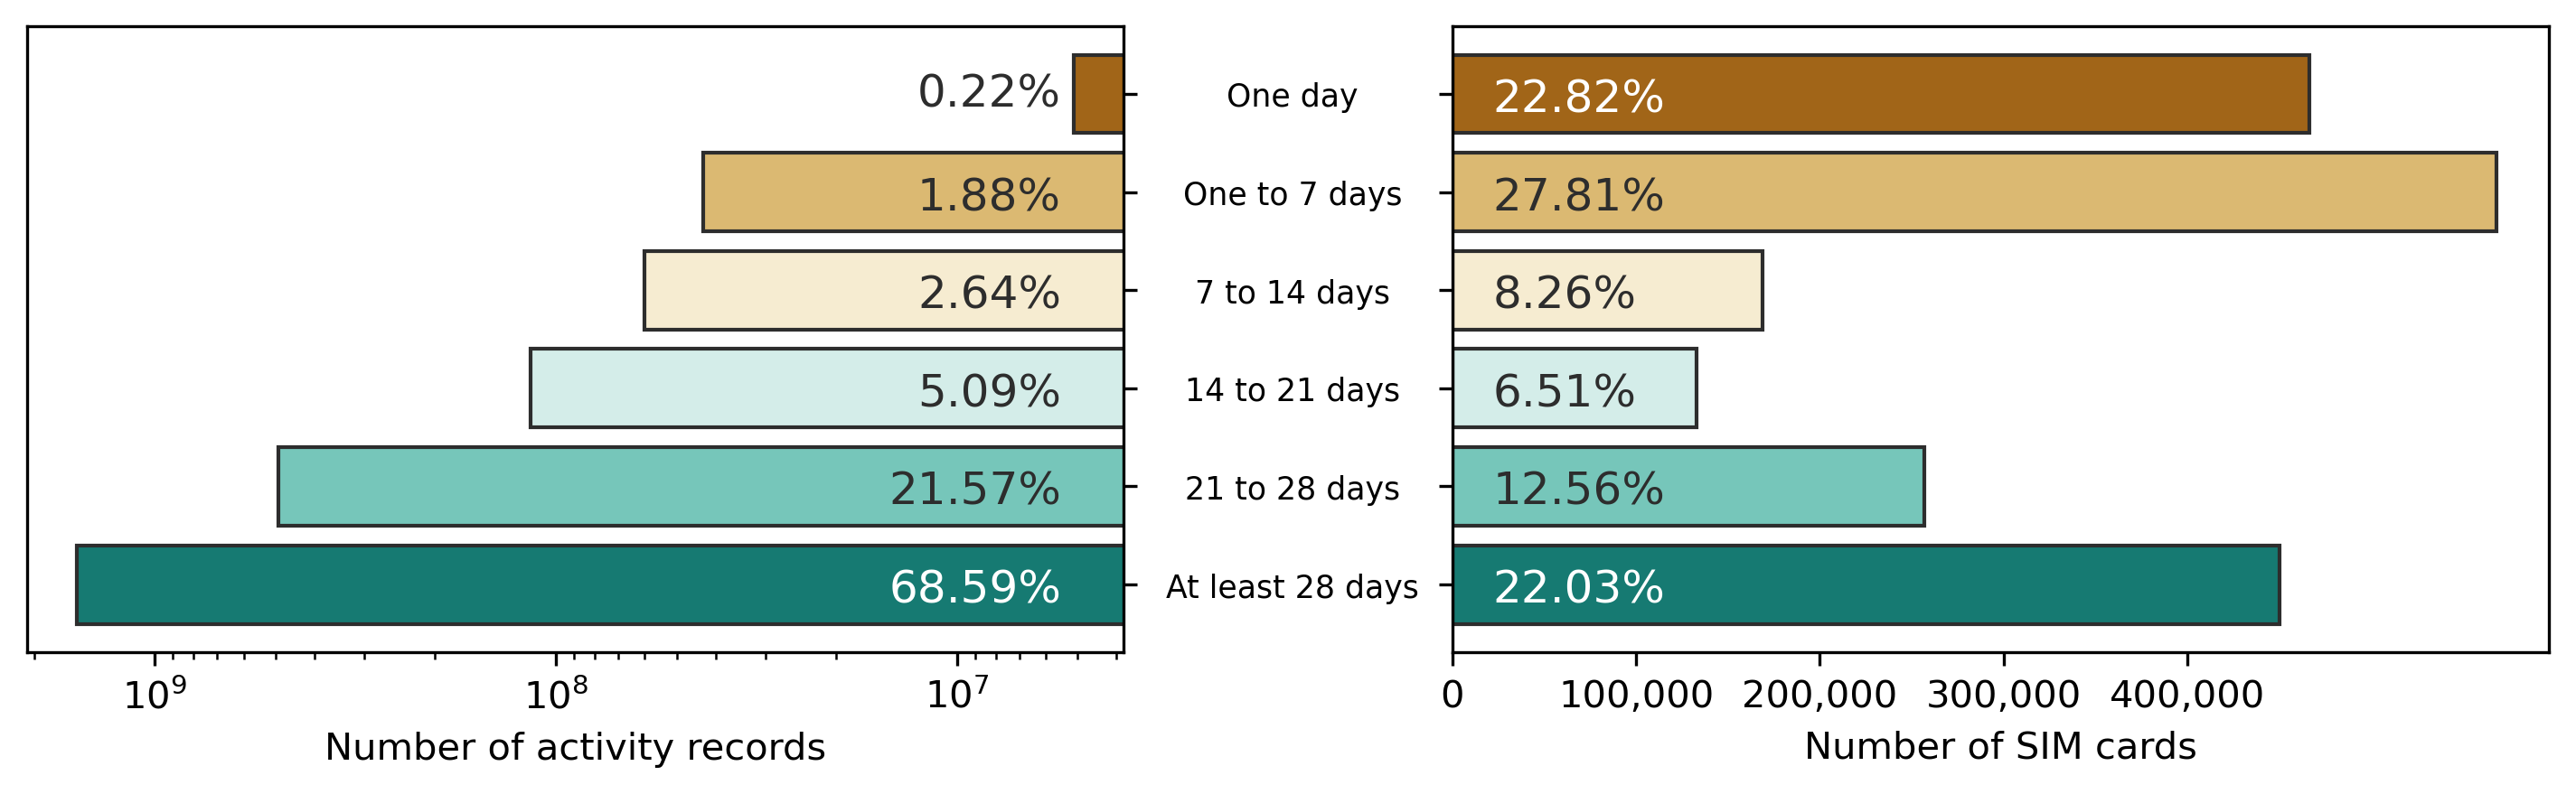 Subscriber Identity Module card distribution in the 2016-06 data set by the number of active days, in contrast of the number of records generated per category.